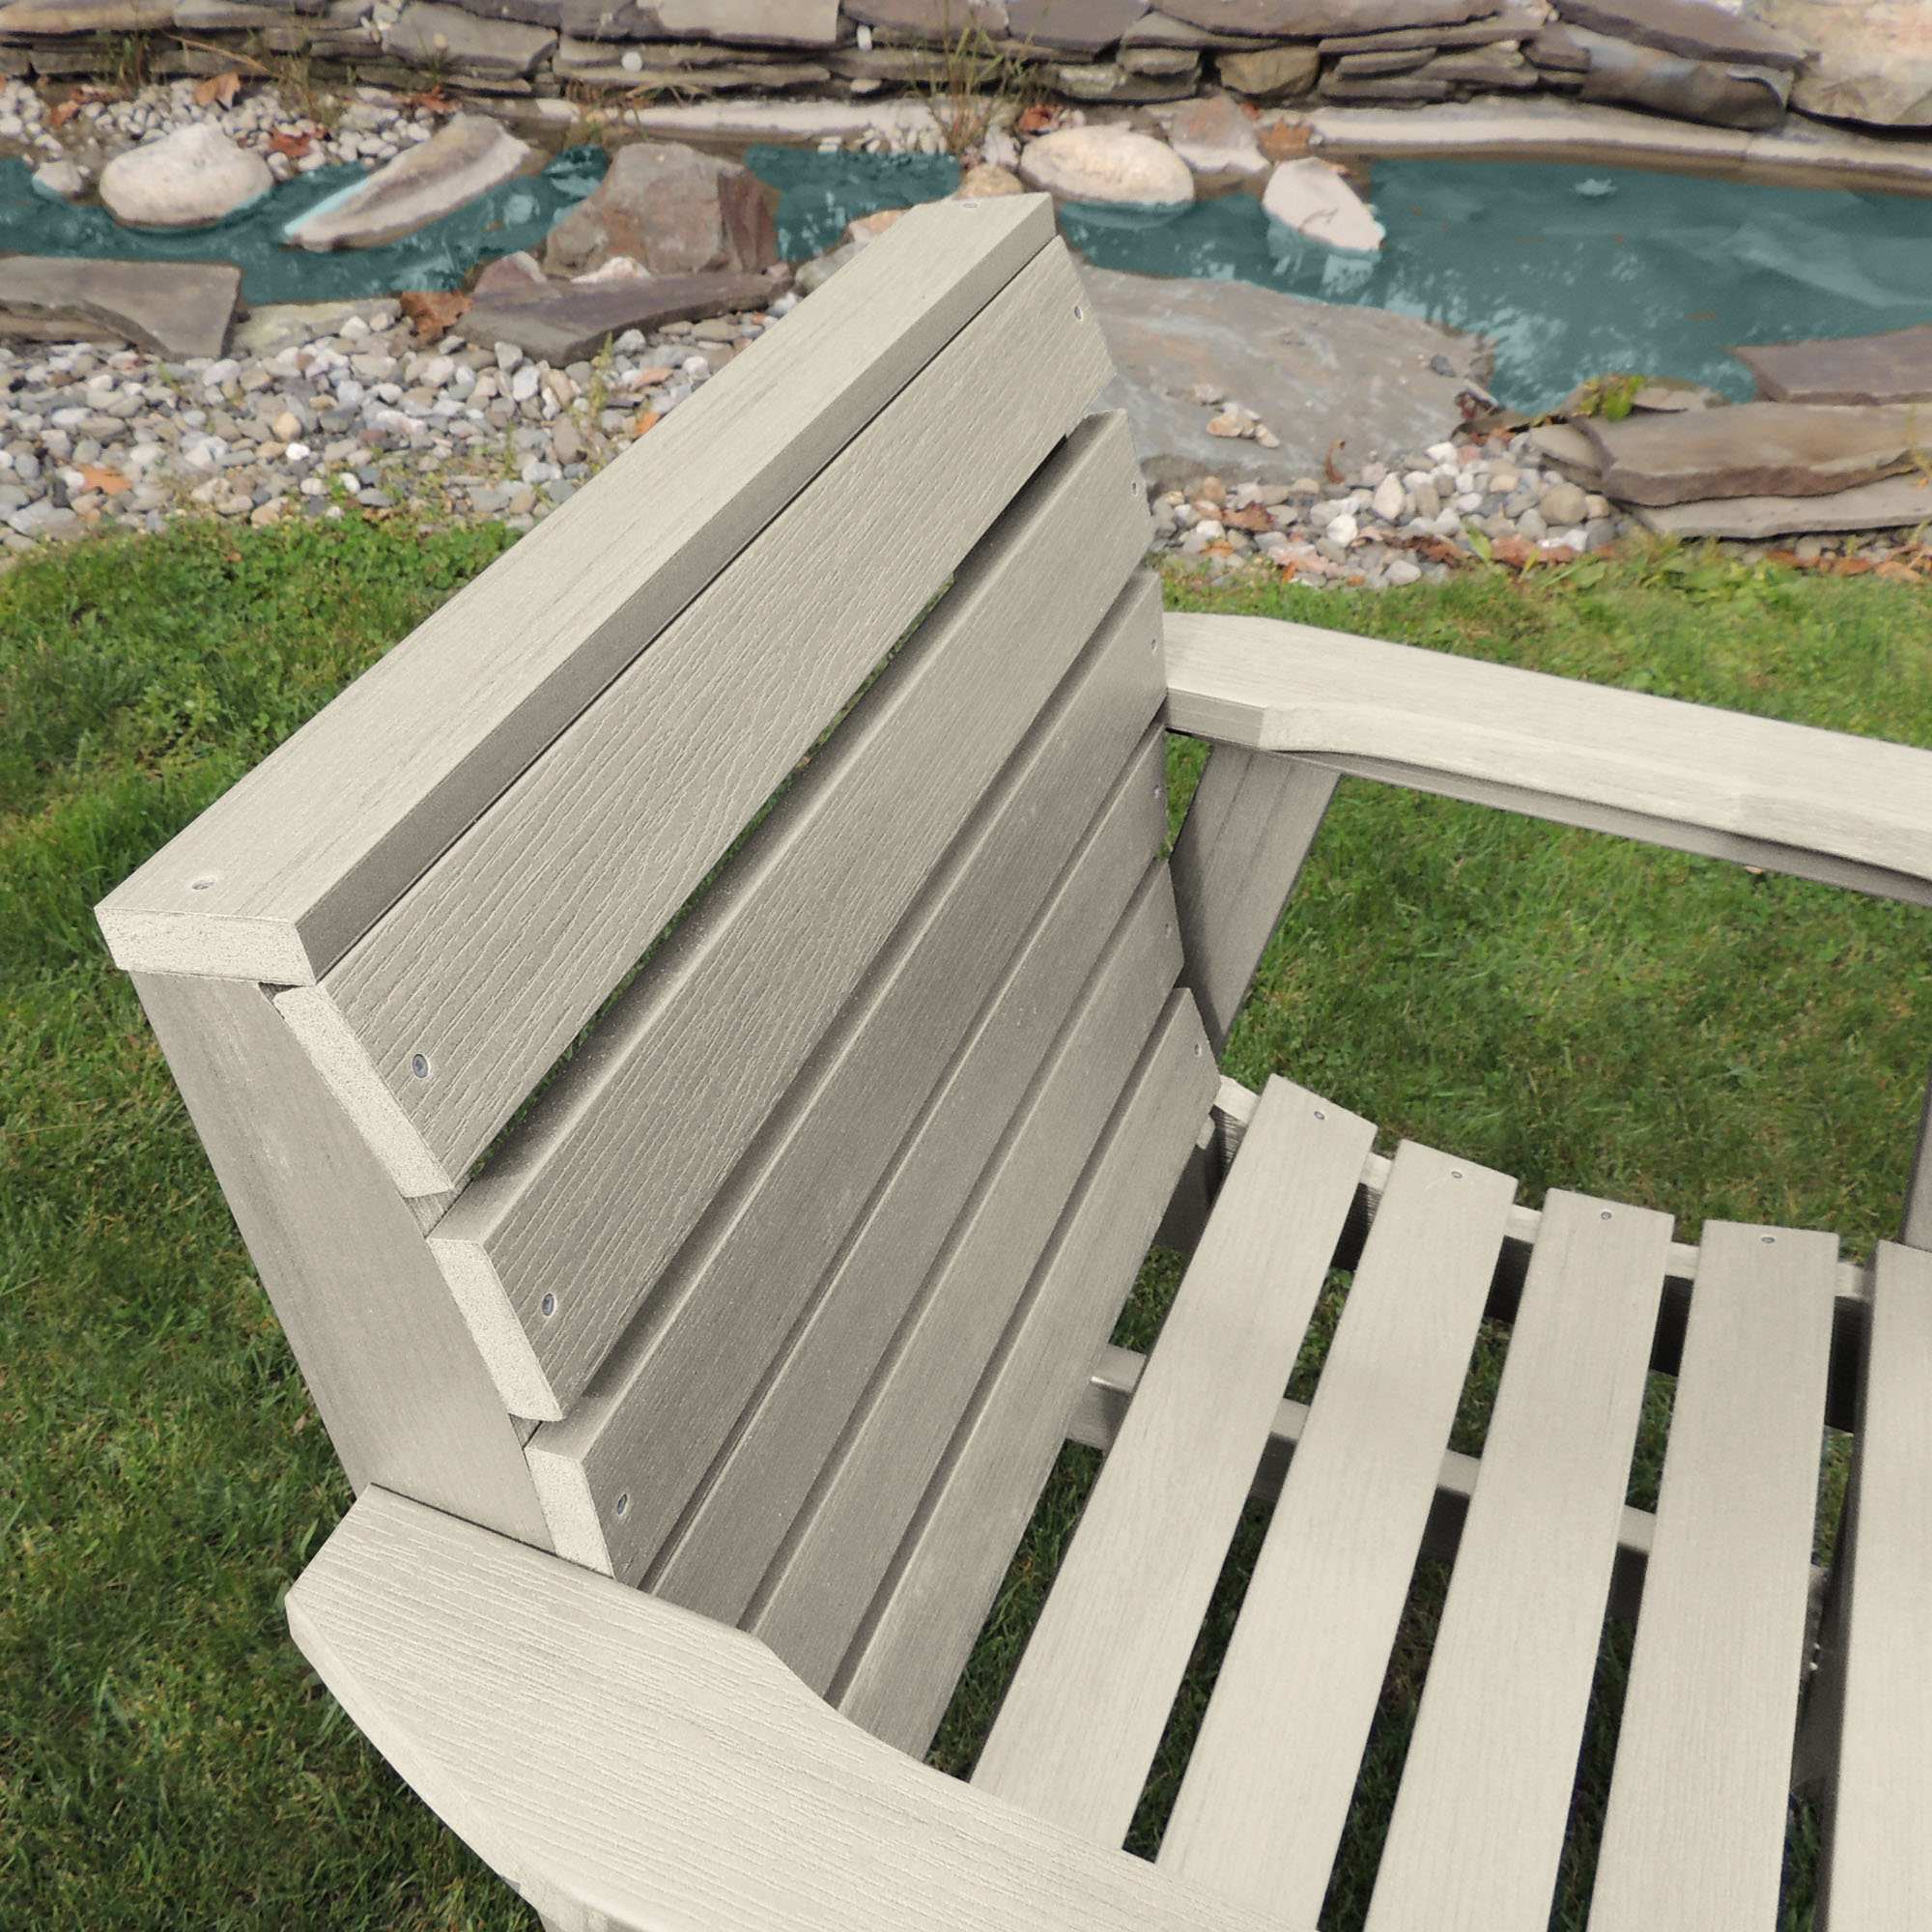 Highwood Weatherly Garden Chair - image 4 of 5